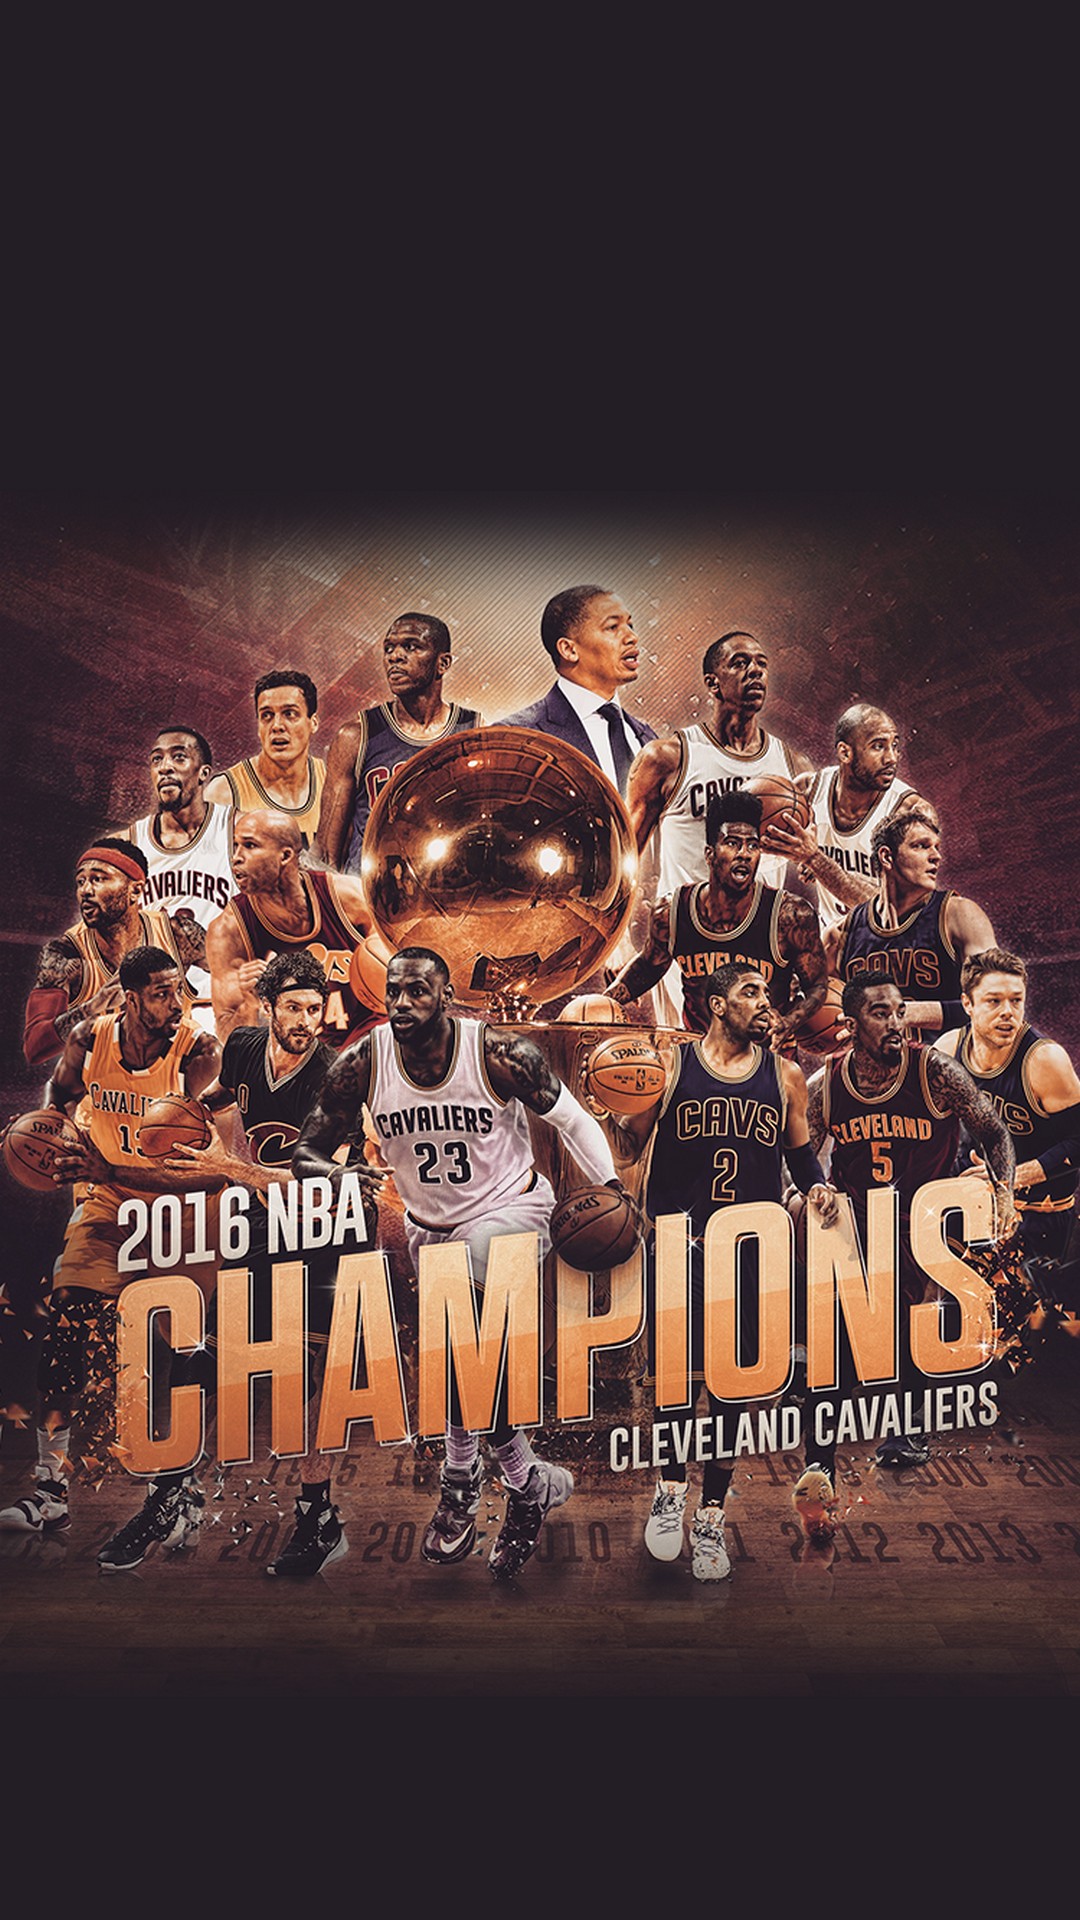 Cavs Champs iPhone Wallpaper